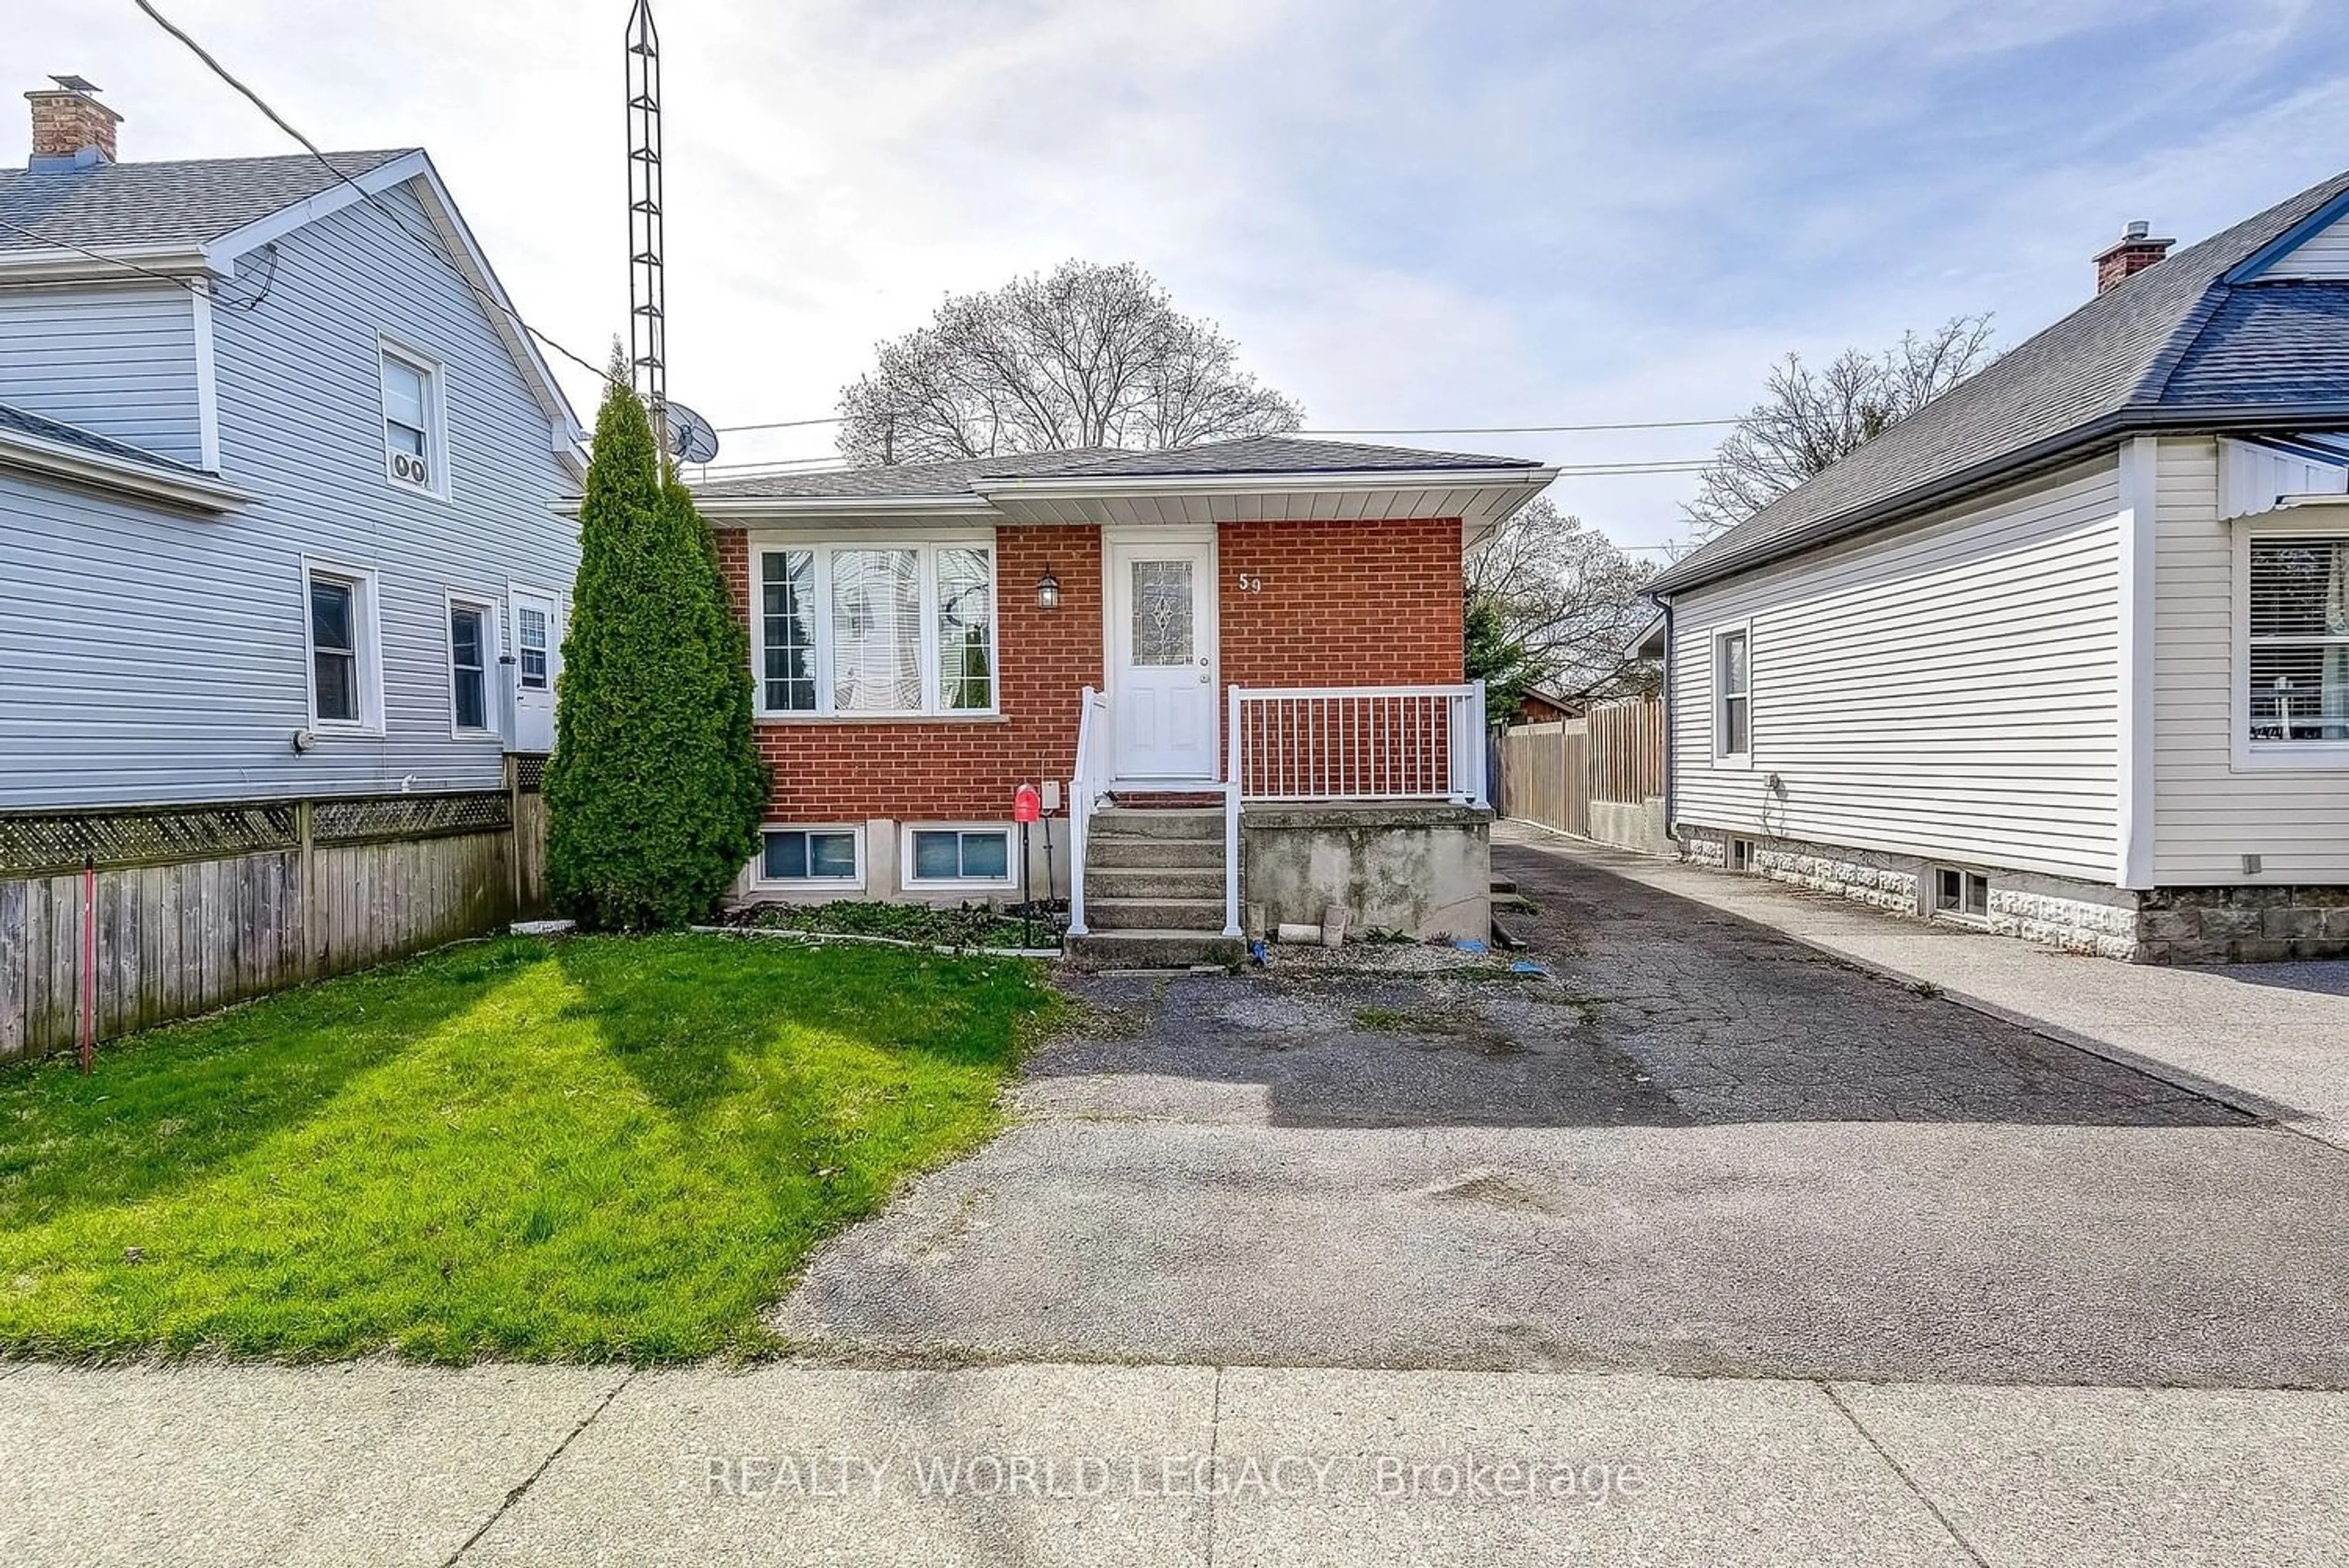 Frontside or backside of a home for 59 Rodman St, St. Catharines Ontario L2R 5C9